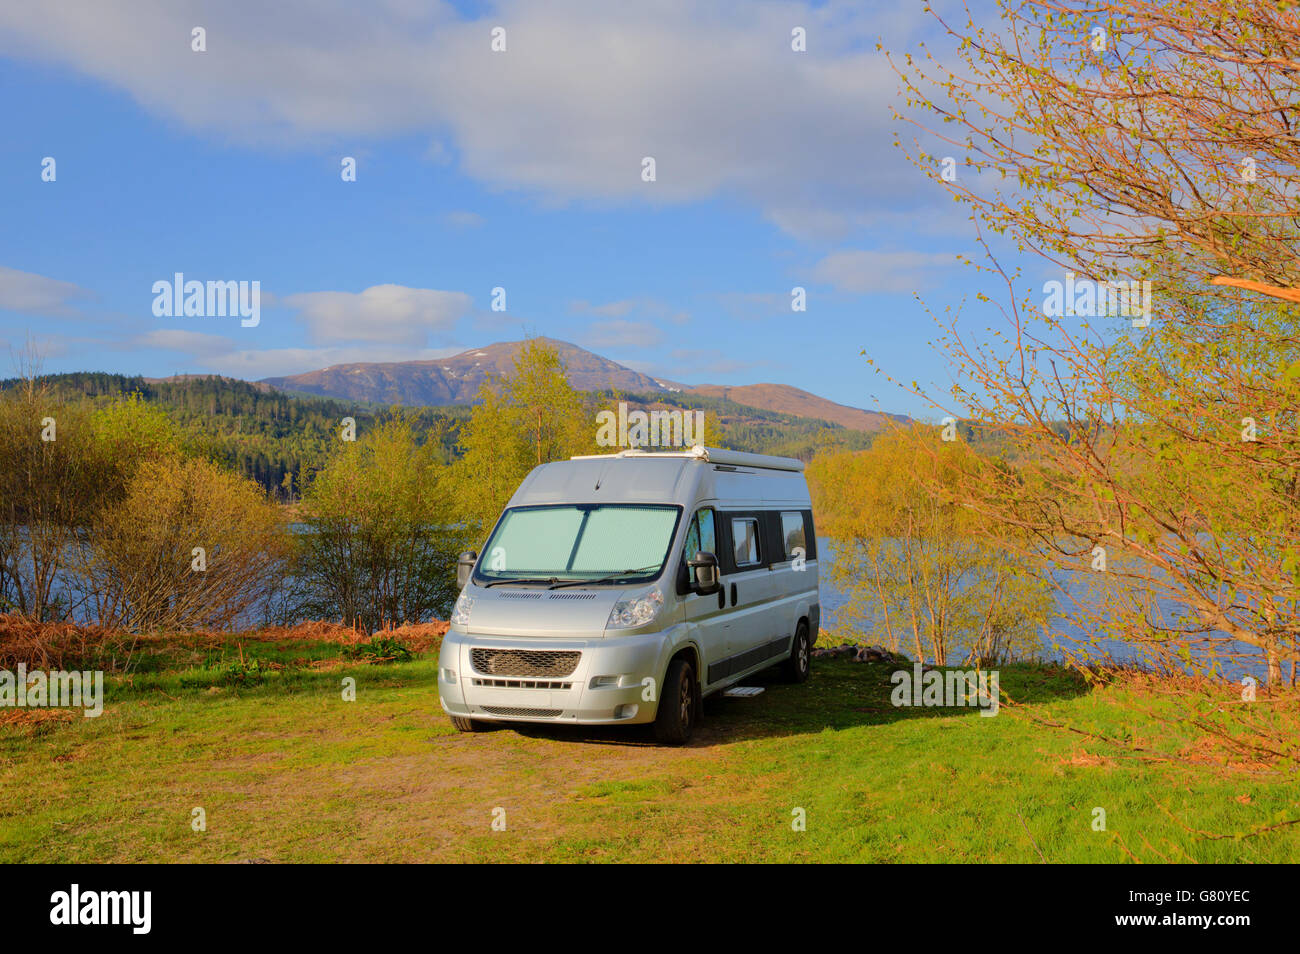 Campervan wildcamping in Scotland by Scottish Loch Garry UK with mountains in summer Stock Photo